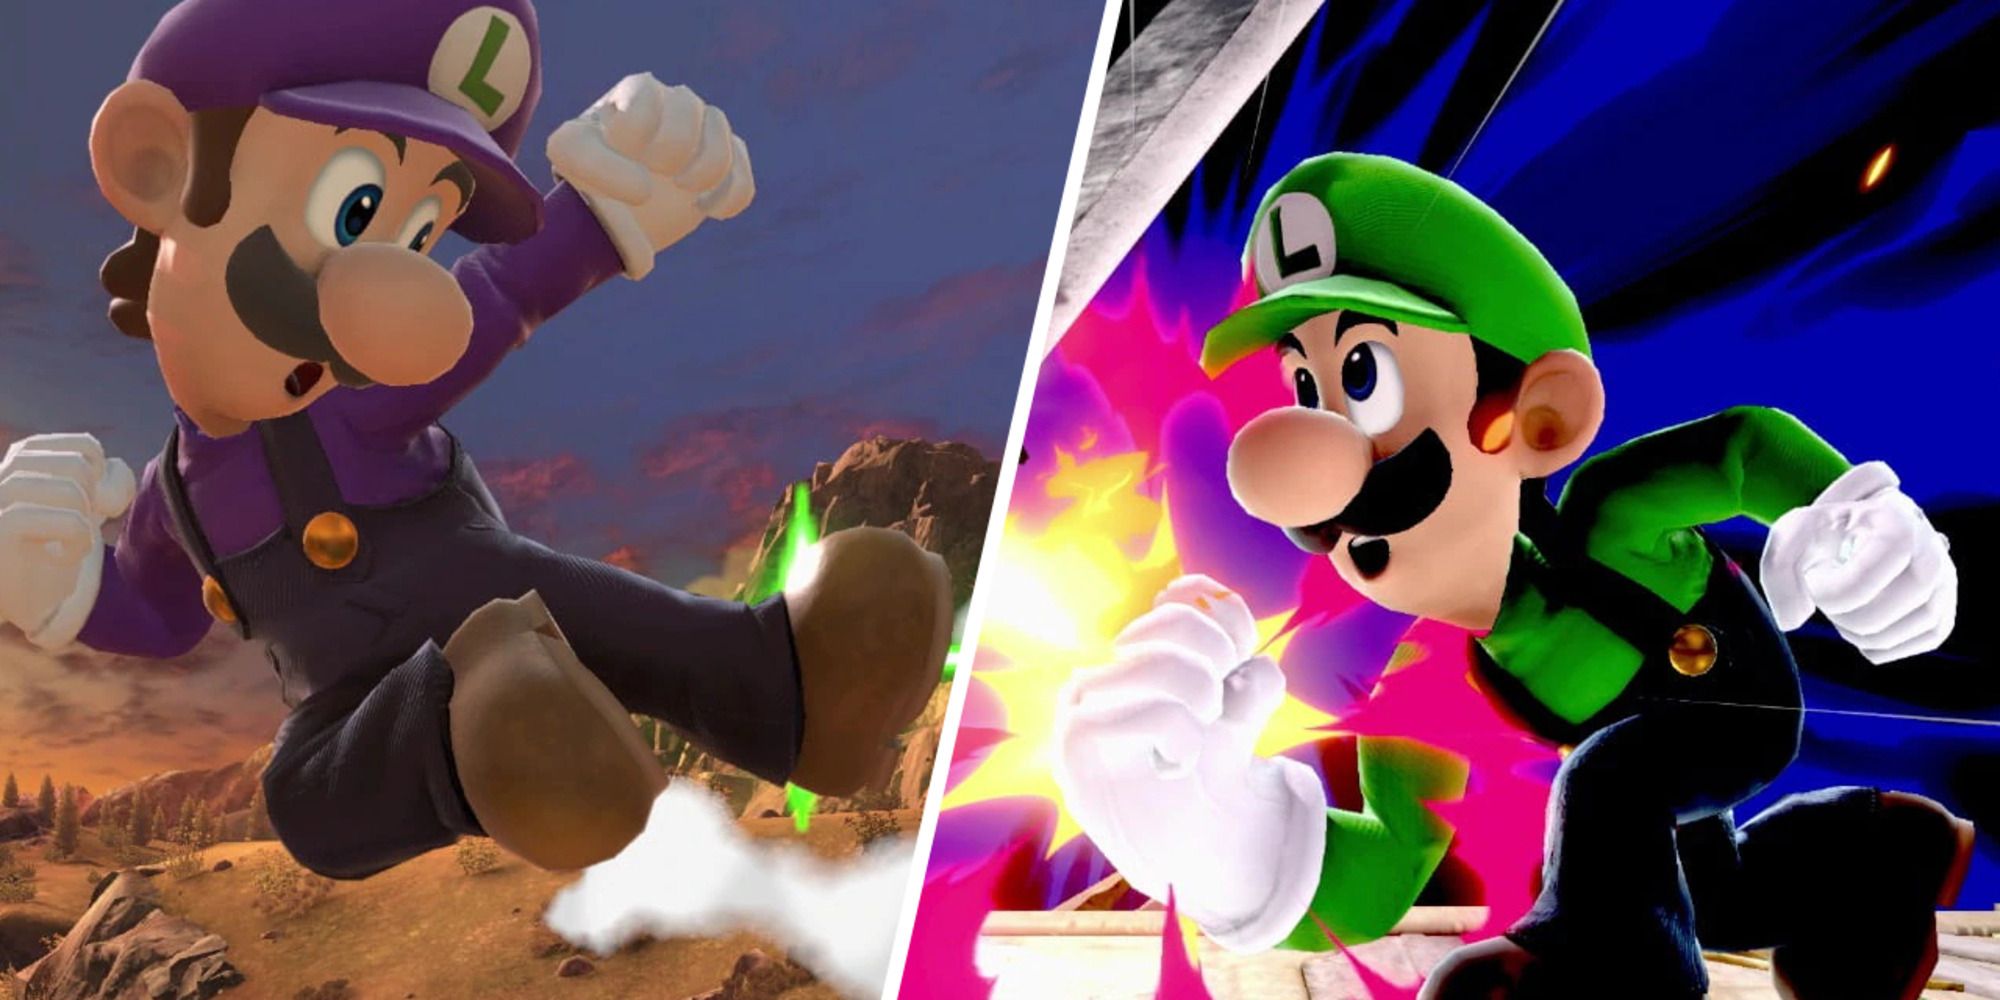 Luigi using his Nair on the left and his Up-B against an off-picture Cloud in Super Smash Bros. Ultimate.